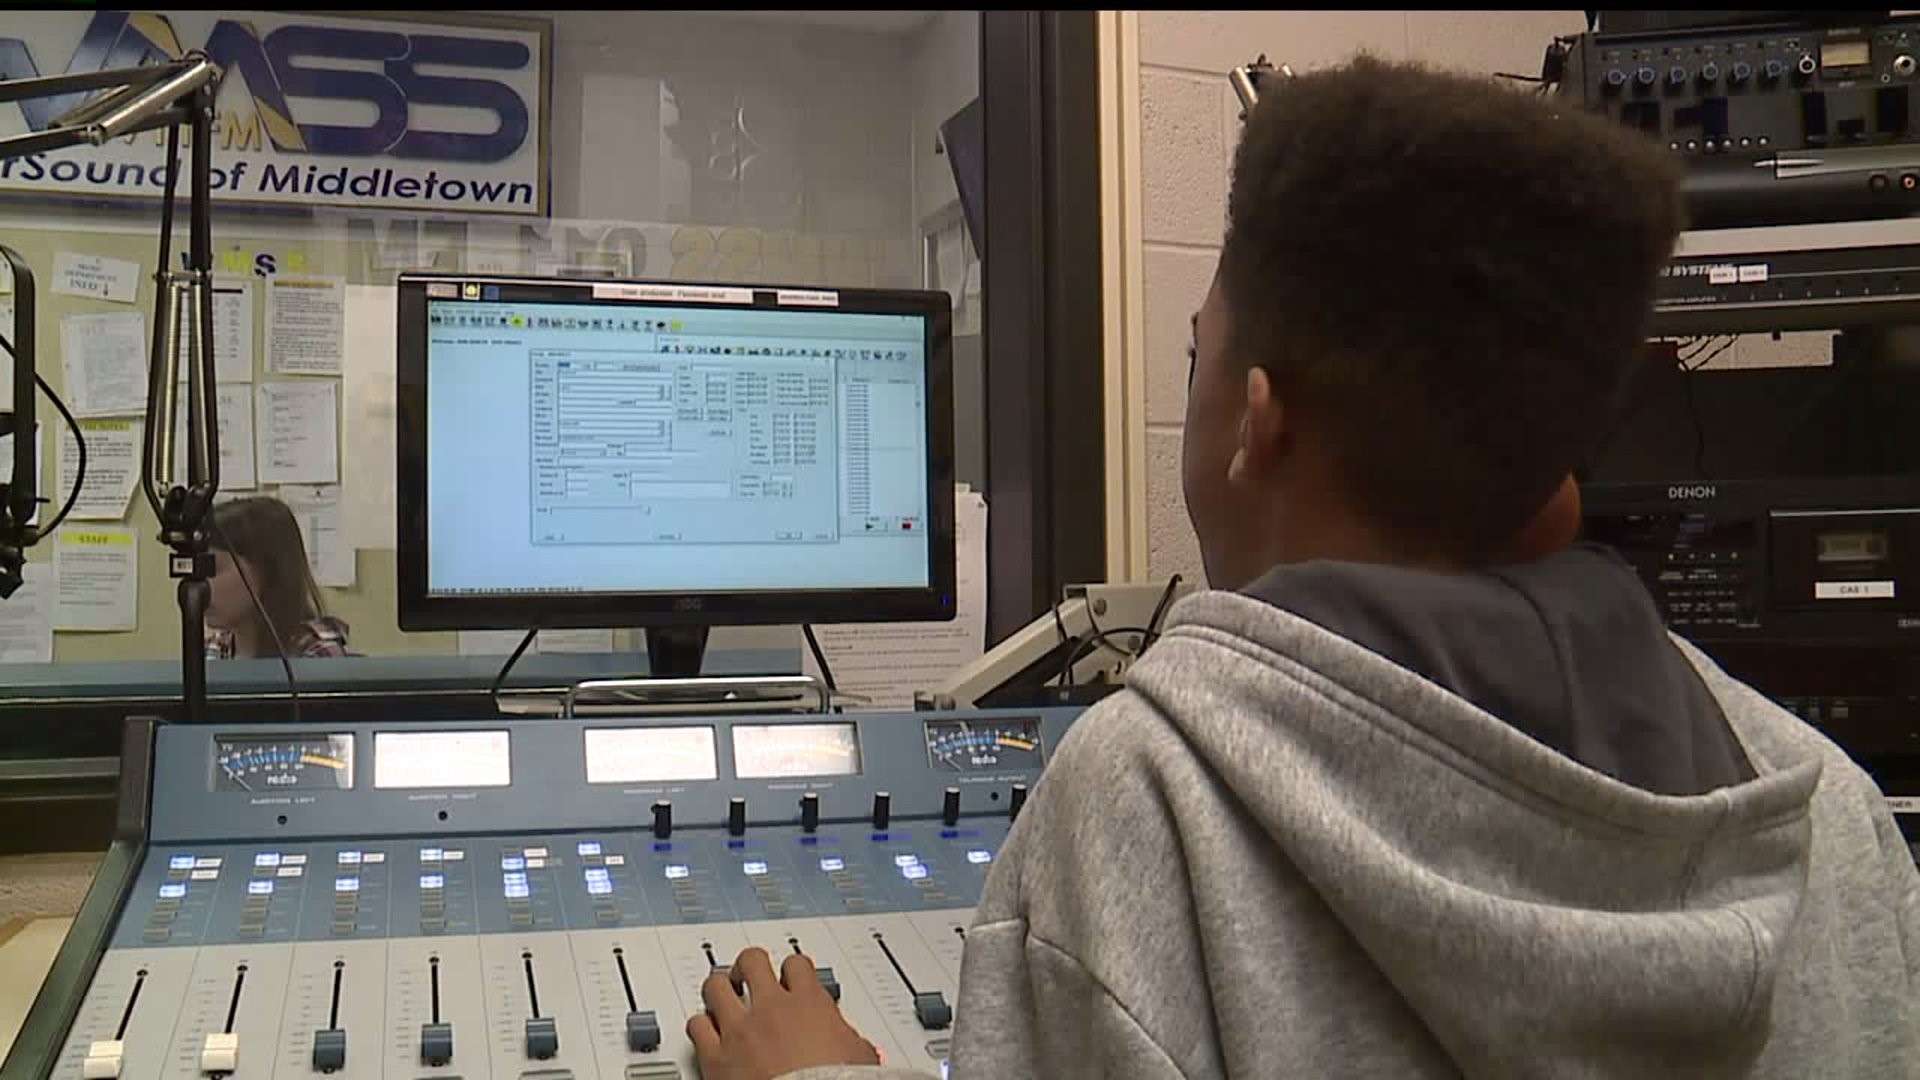 Live and Local: Student run radio station in Middletown